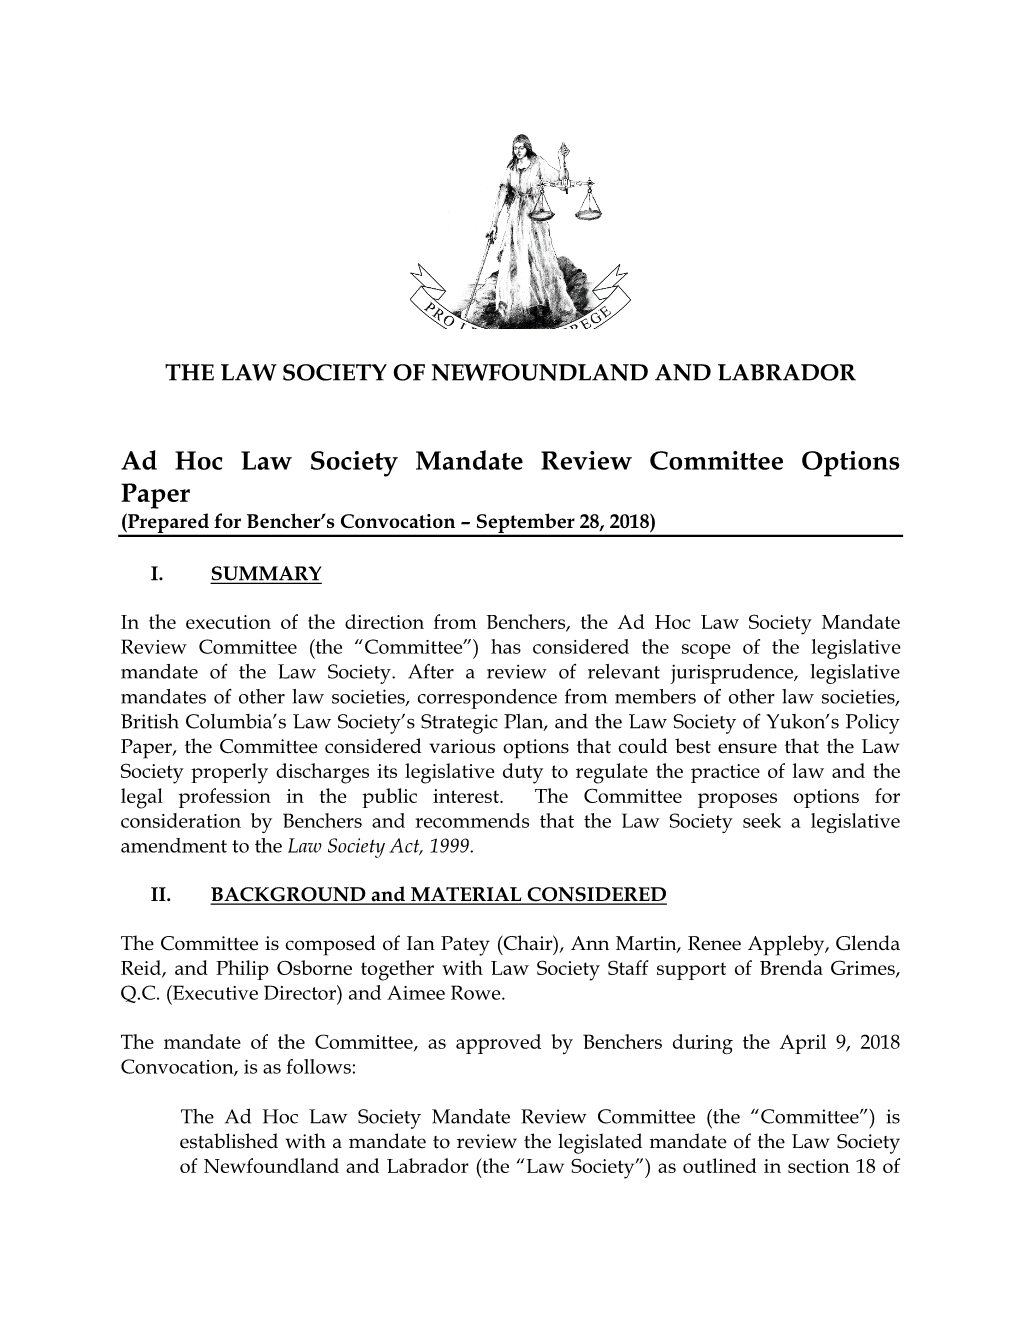 Ad Hoc Law Society Mandate Review Committee Options Paper (Prepared for Bencher’S Convocation – September 28, 2018)